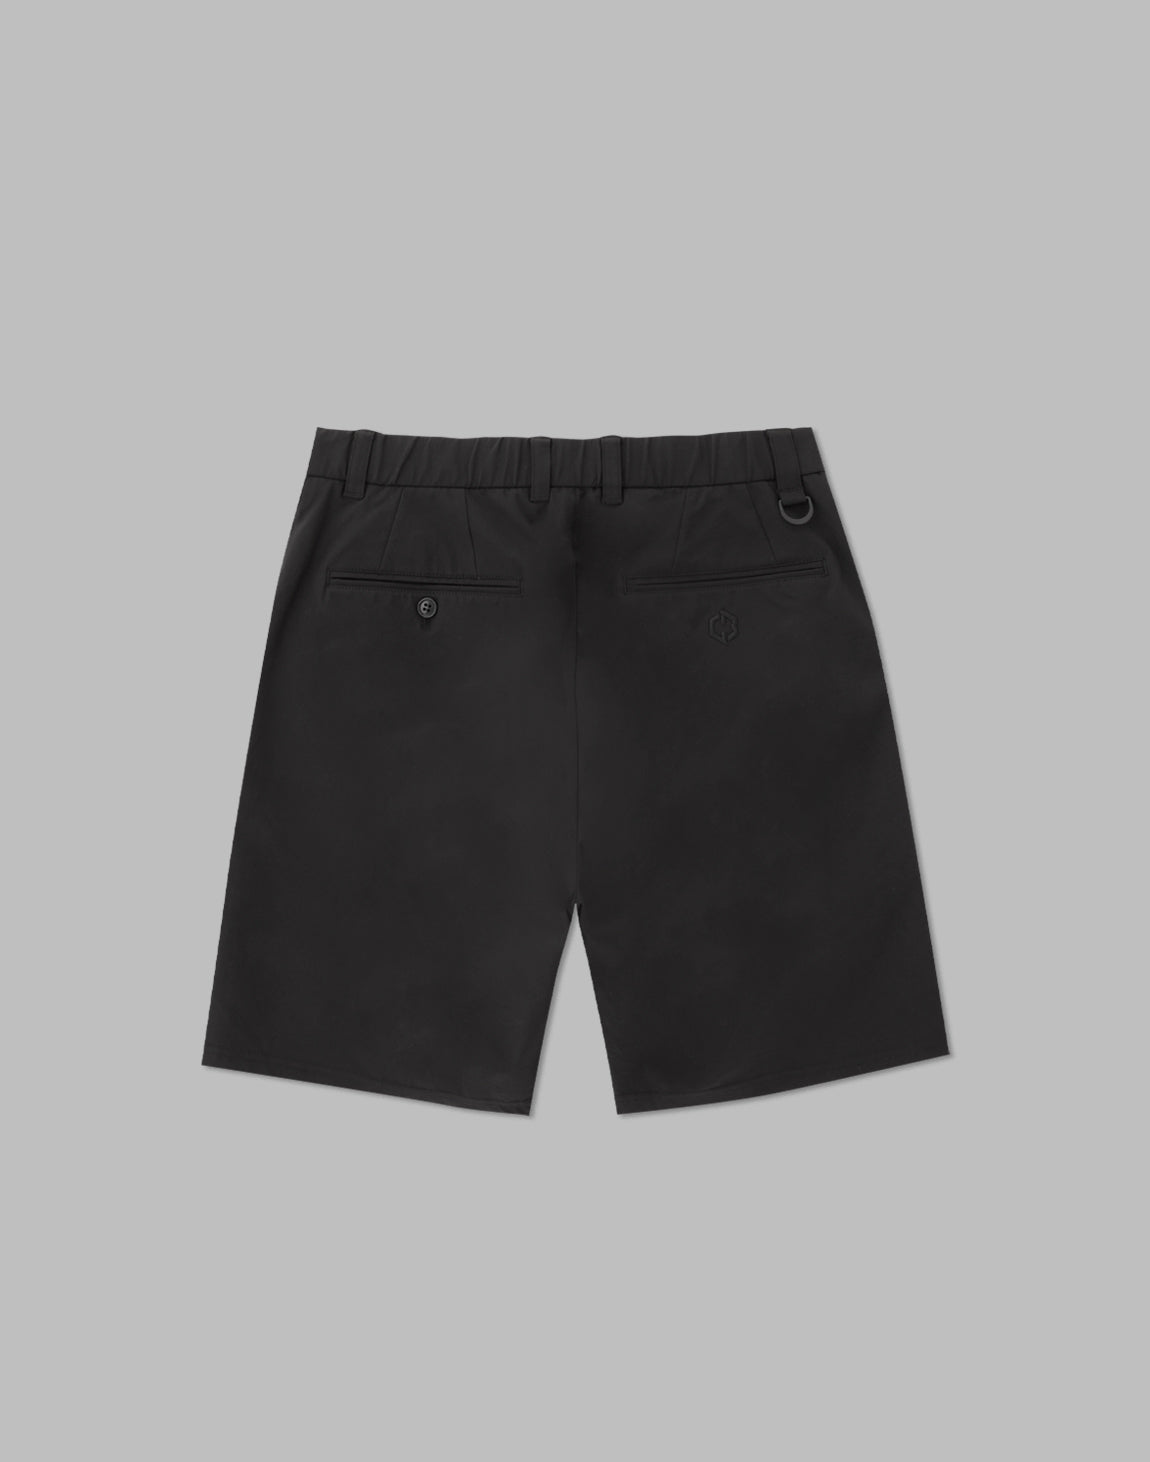 CRONOS BLACK 2LINE SHORTS – クロノス CRONOS Official Store